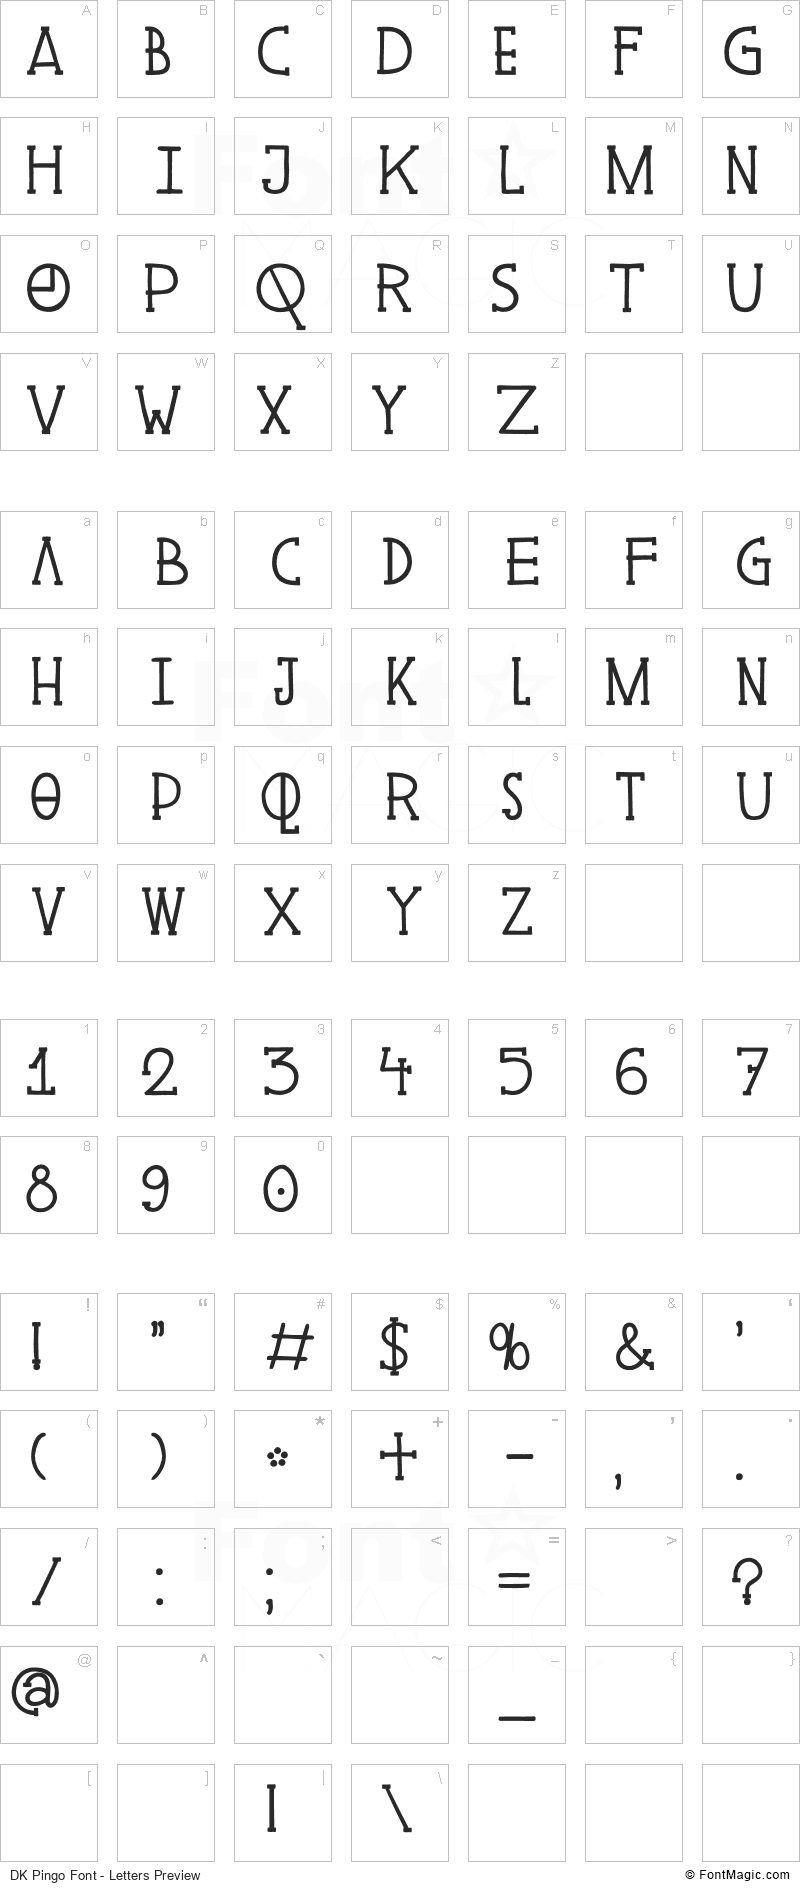 DK Pingo Font - All Latters Preview Chart